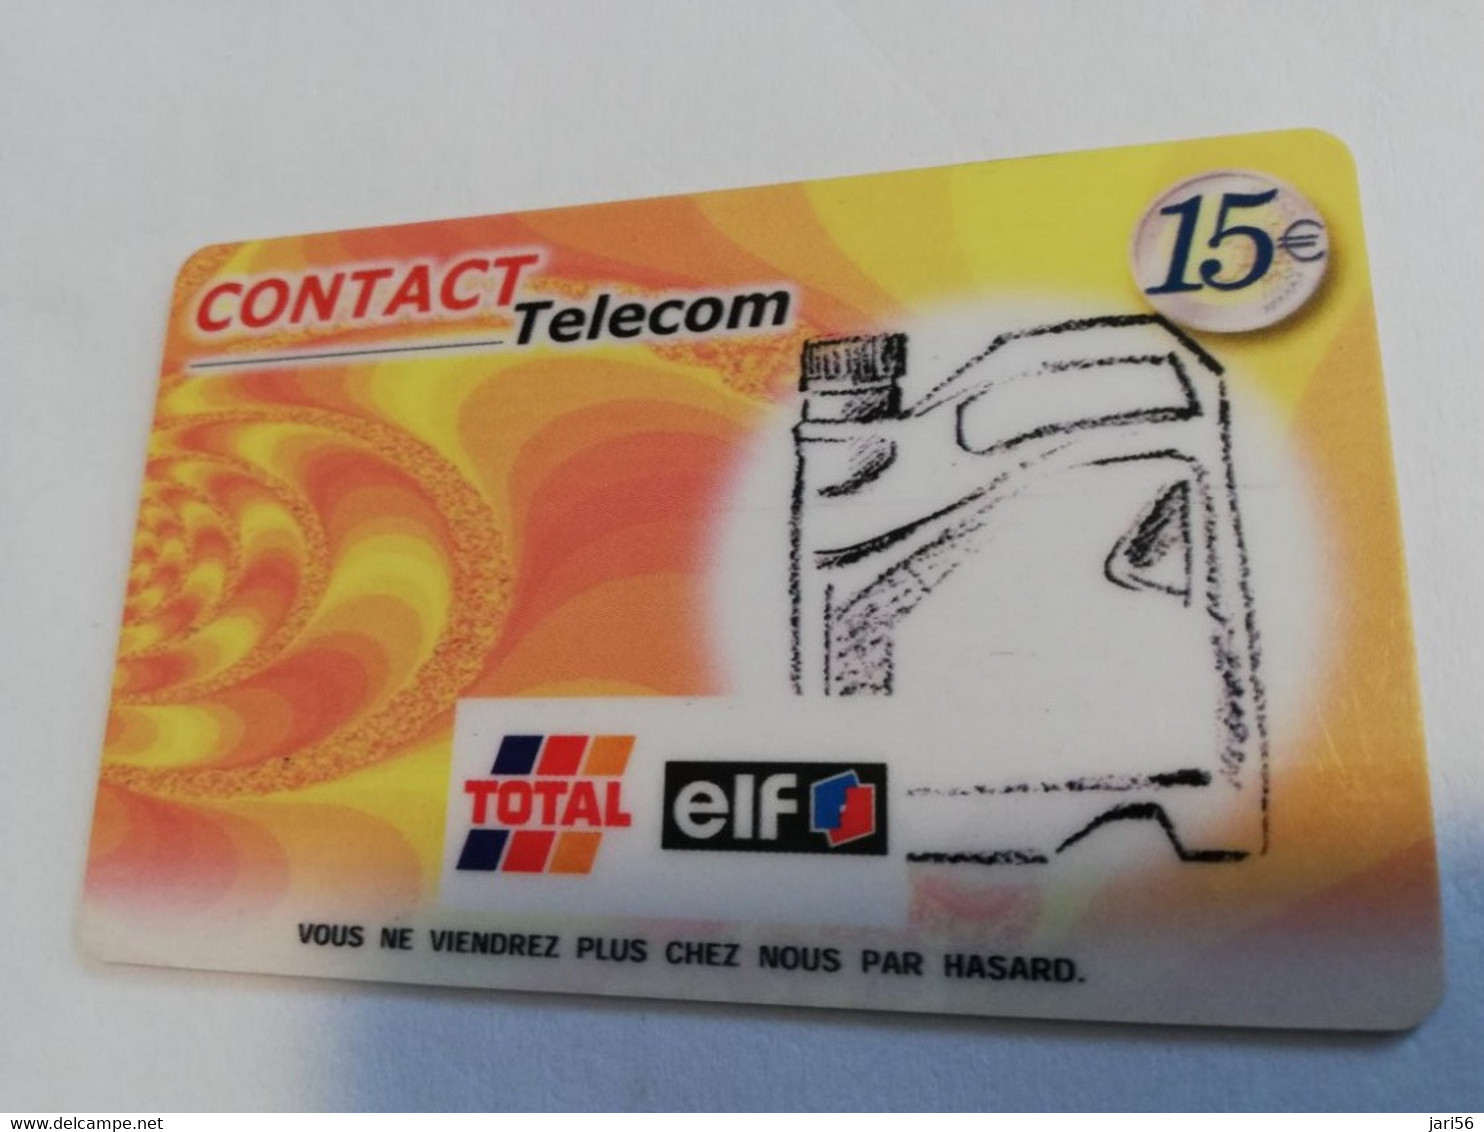 ST MARTIN FRENCH SIDE 3CARDS  SERIE € 5,-+ € 10,-+ € 15,-  GAS STATION TOTAL/ELF   CONTACT TELECOM    **6579 ** - Antillas (Francesas)